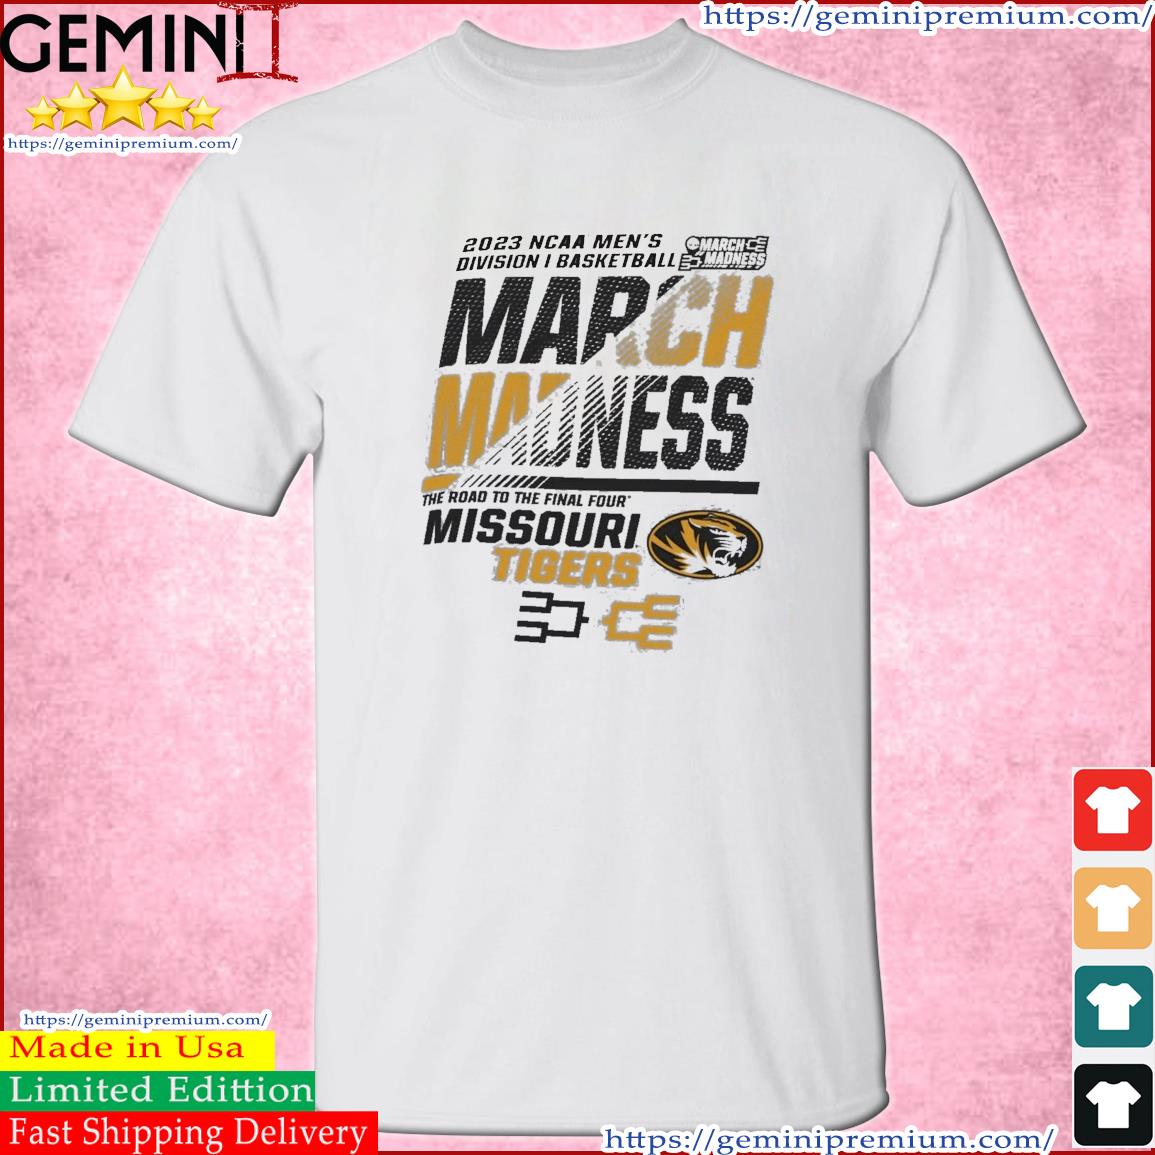 Missouri Men's Basketball 2023 NCAA March Madness The Road To Final Four Shirt